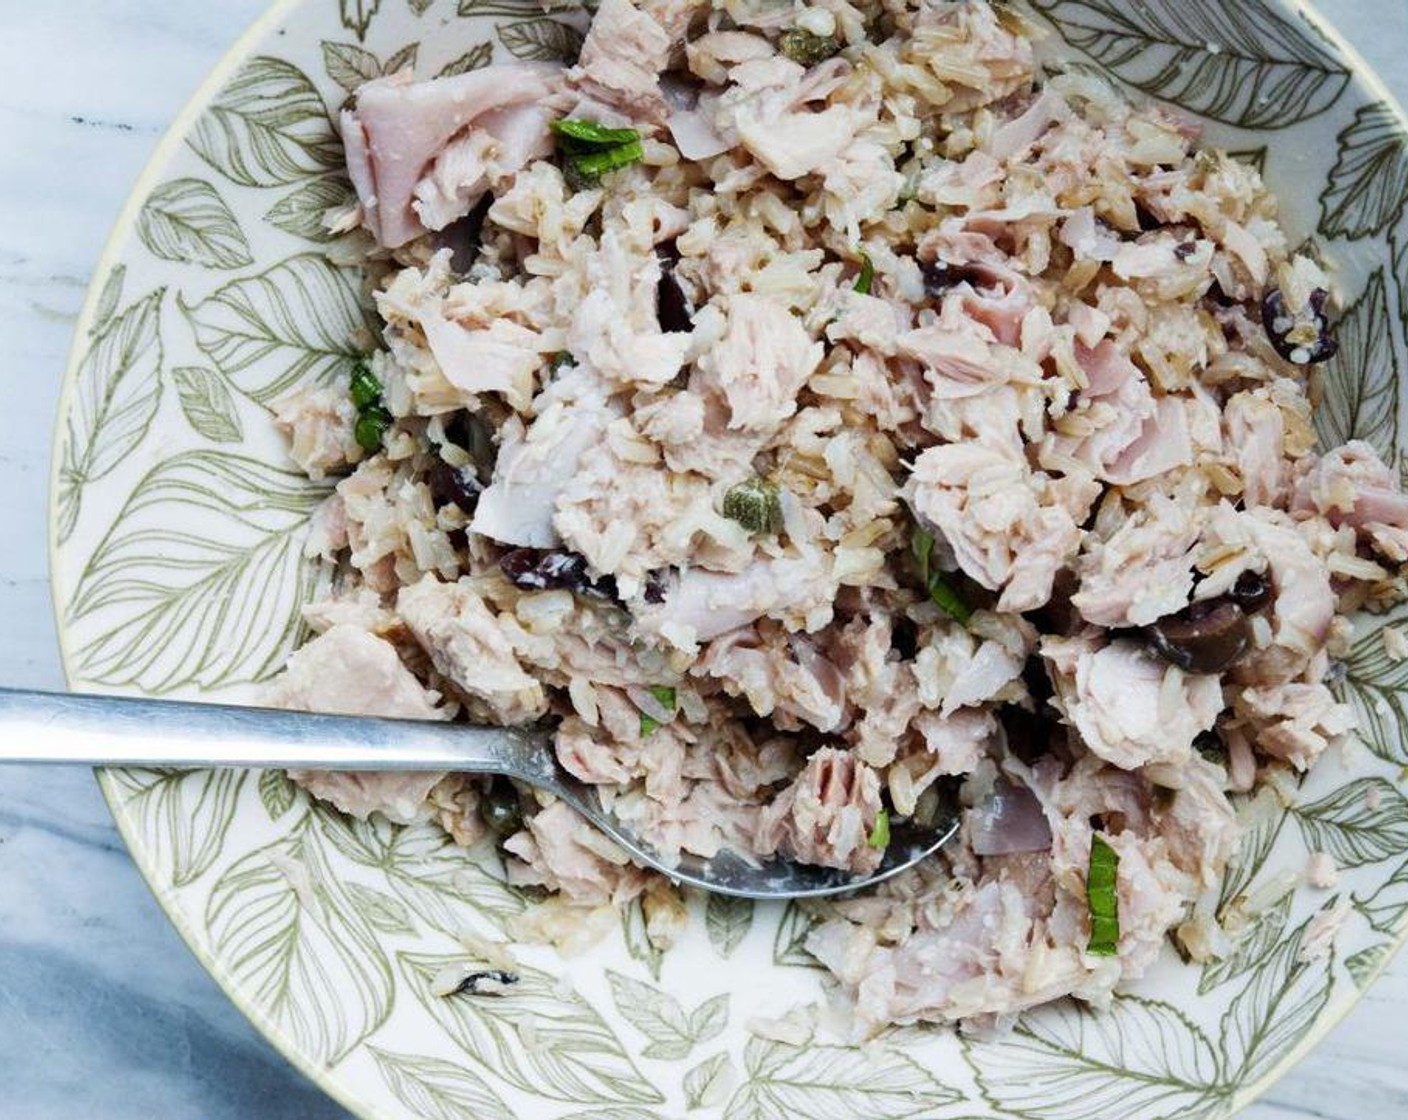 step 2 In a bowl, stir in Canned Tuna (1/2 cup), Capers (1 tsp), Parmesan Cheese (1 Tbsp), Prosciutto (2 oz), cooked Mahatma® 100% Whole Grain Brown Rice (2 Tbsp), Salt (to taste) and Ground Black Pepper (to taste) and Fresh Parsley (1 Tbsp).